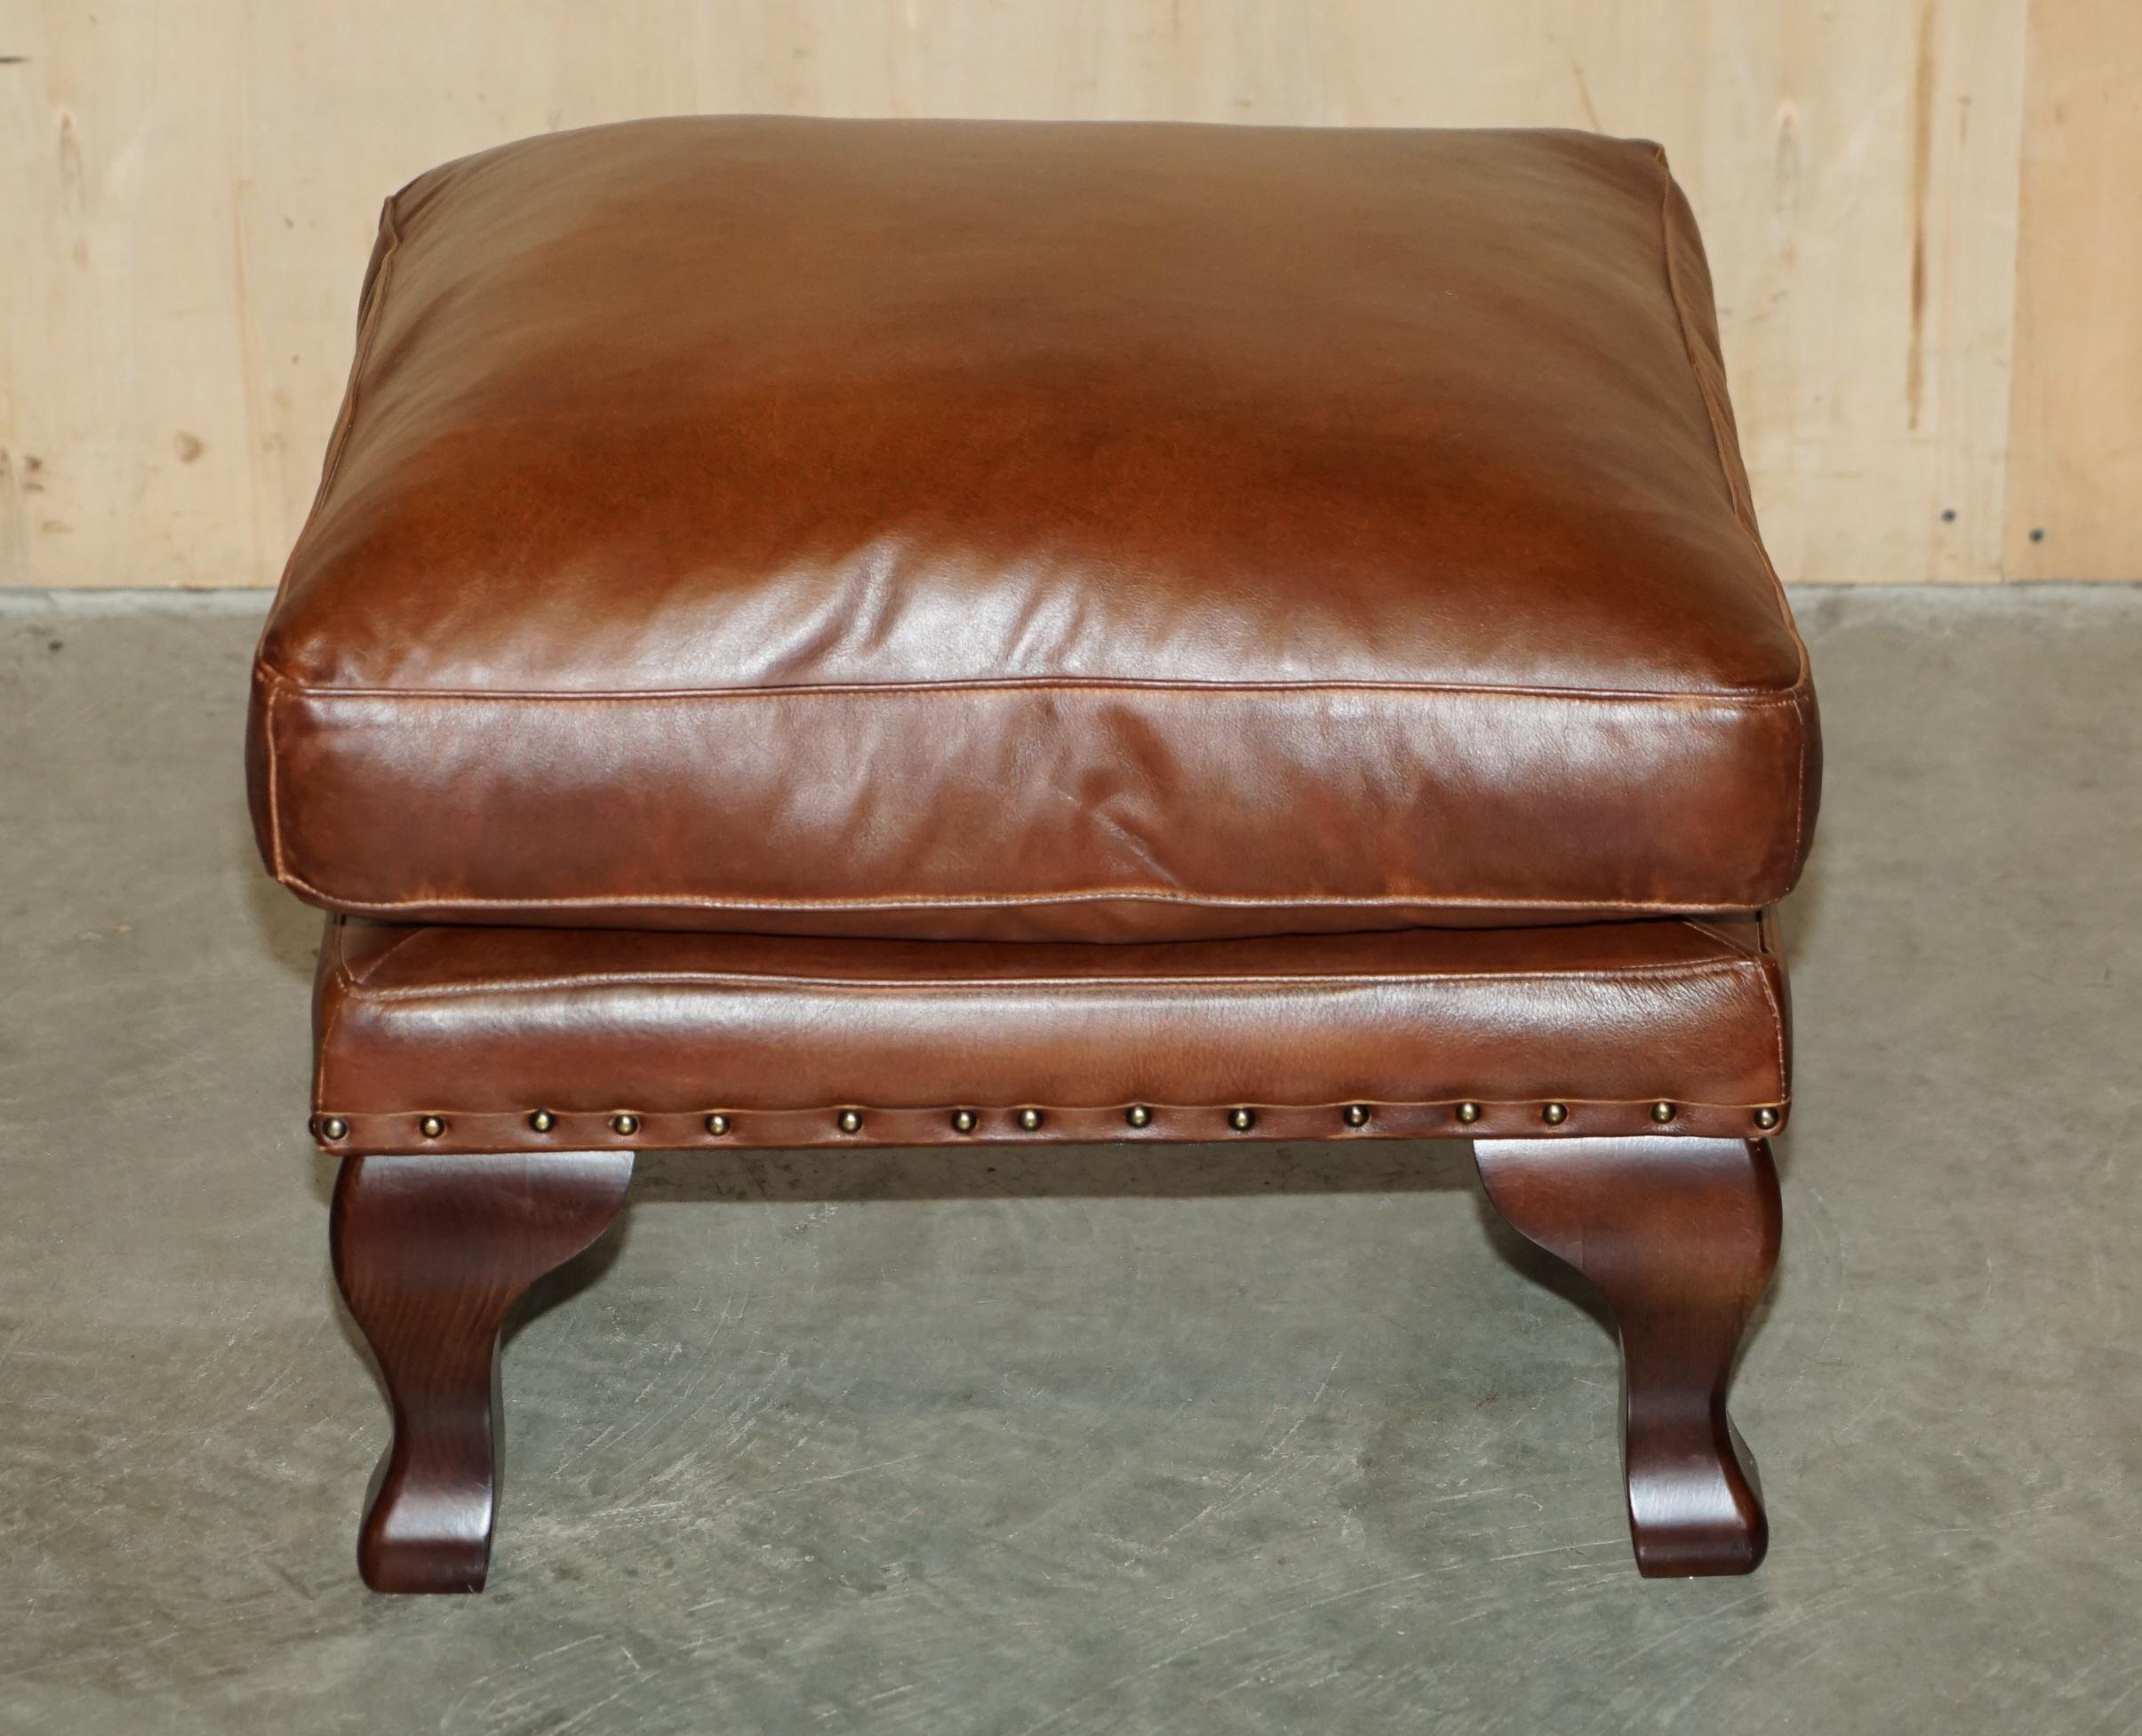 Royal House Antiques

Royal House Antiques is delighted to offer for sale this lovely Tetrad heritage brown leather footstool

A good looking and comfortable stool, it has a nice heritage patina to it

We have cleaned waxed and polished the leather,